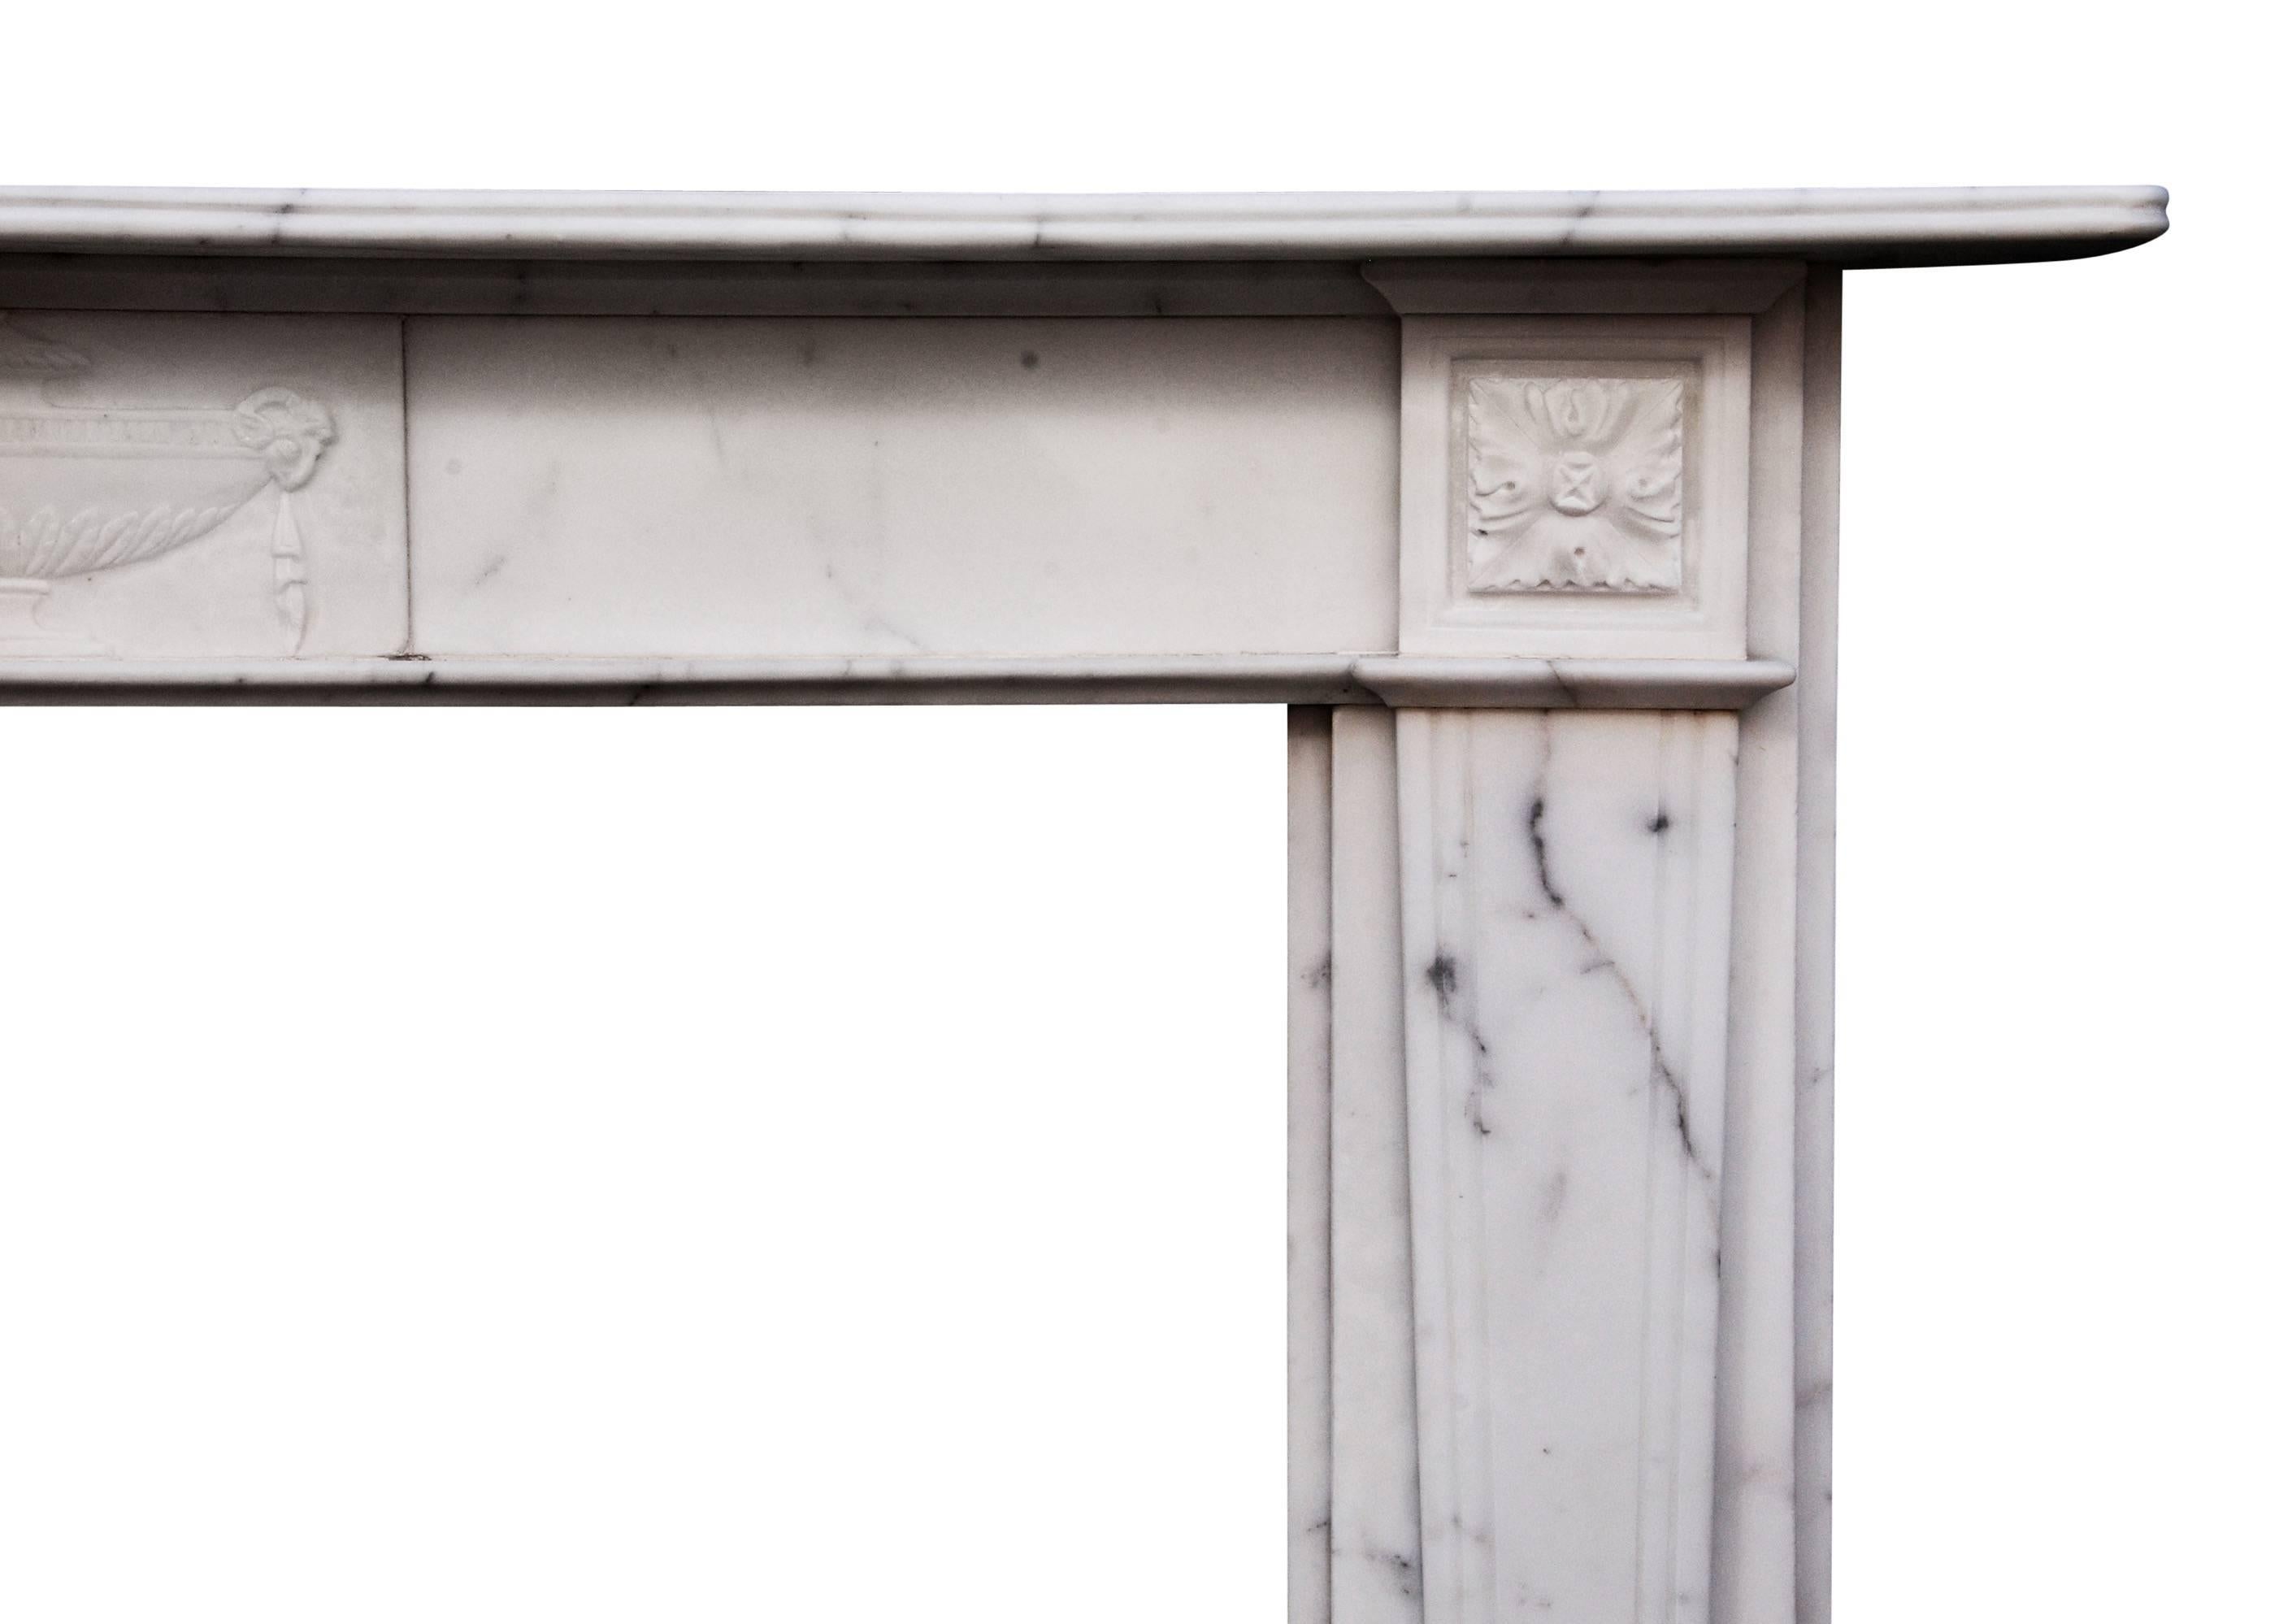 An English veined statuary marble fireplace. The carved centre tablet featuring urn with rams heads, the tapering reeded jambs surmounted by square paterae, 19th century.

Measures: Shelf width 1549 mm 61 in
Overall height 1149 mm 45 ¼